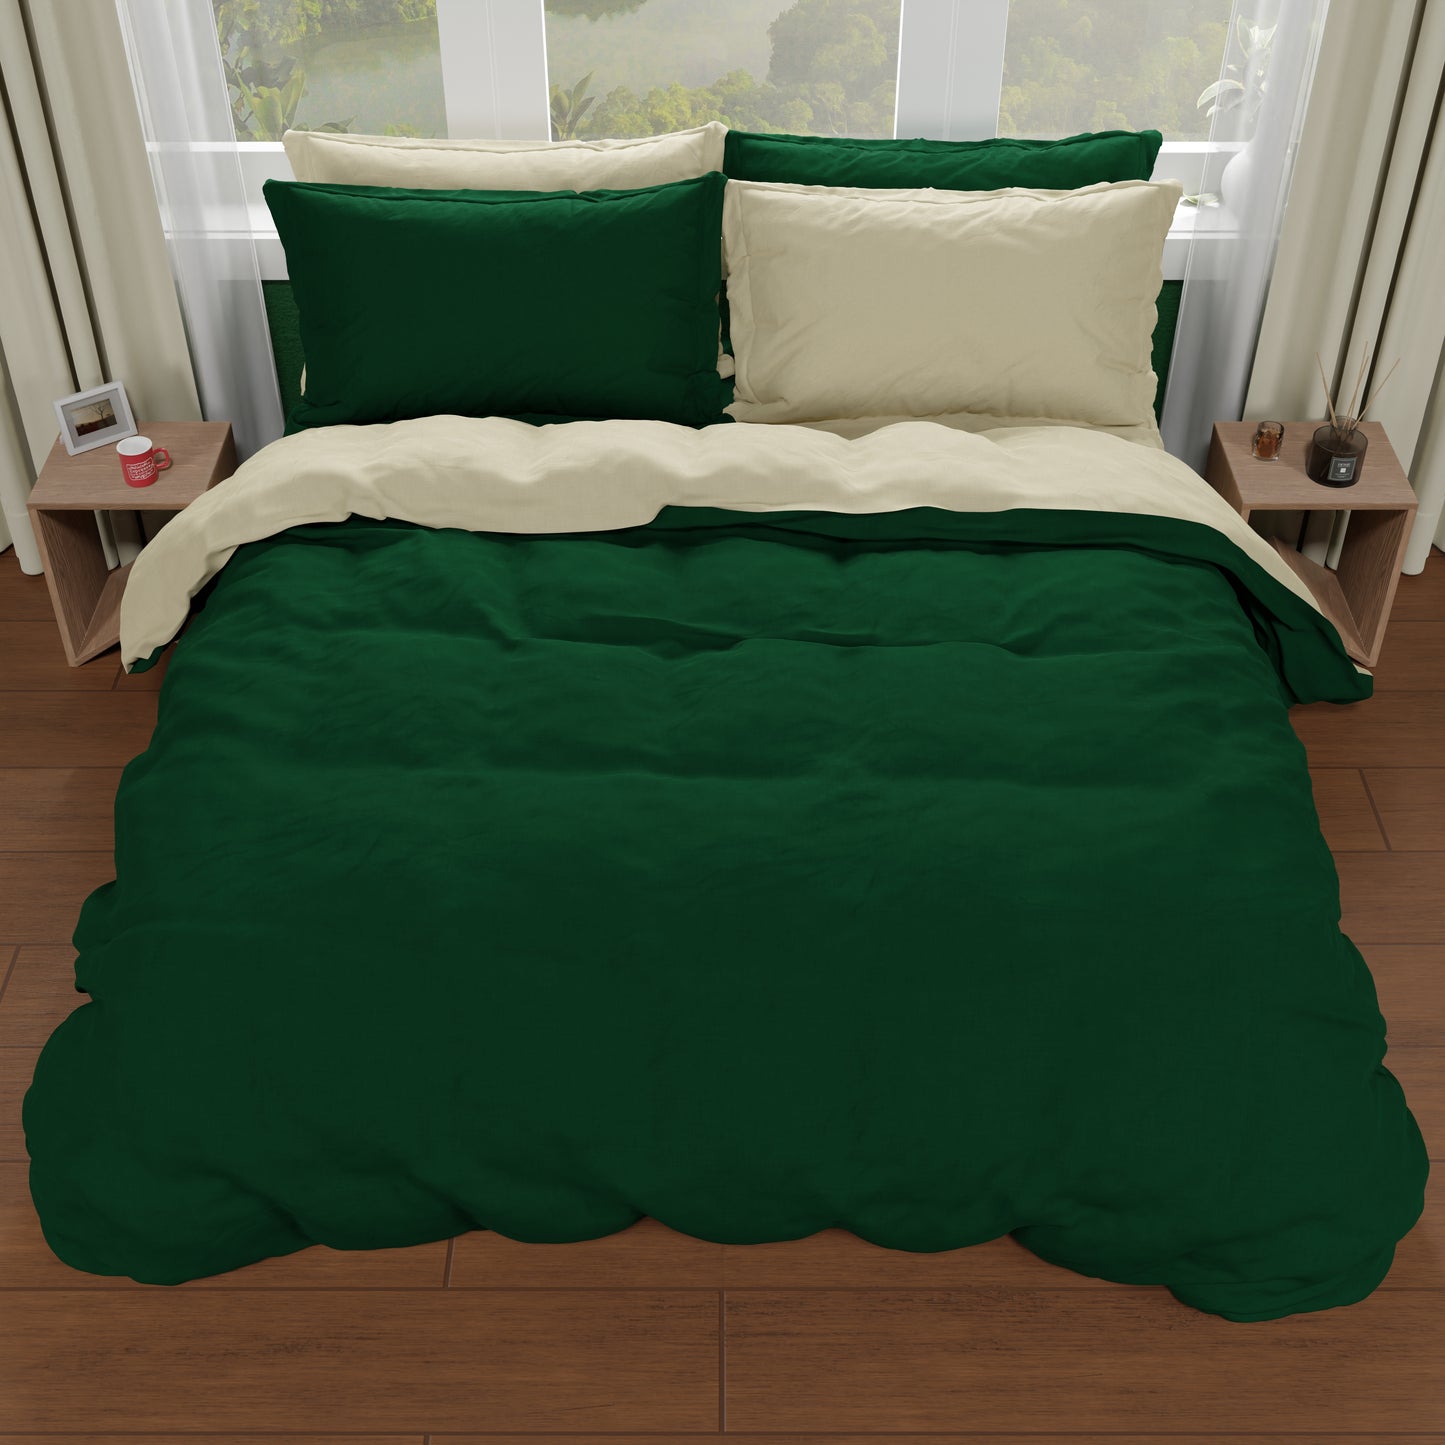 Double Duvet Cover, Duvet Cover and Pillowcases, Taupe/Emerald Green